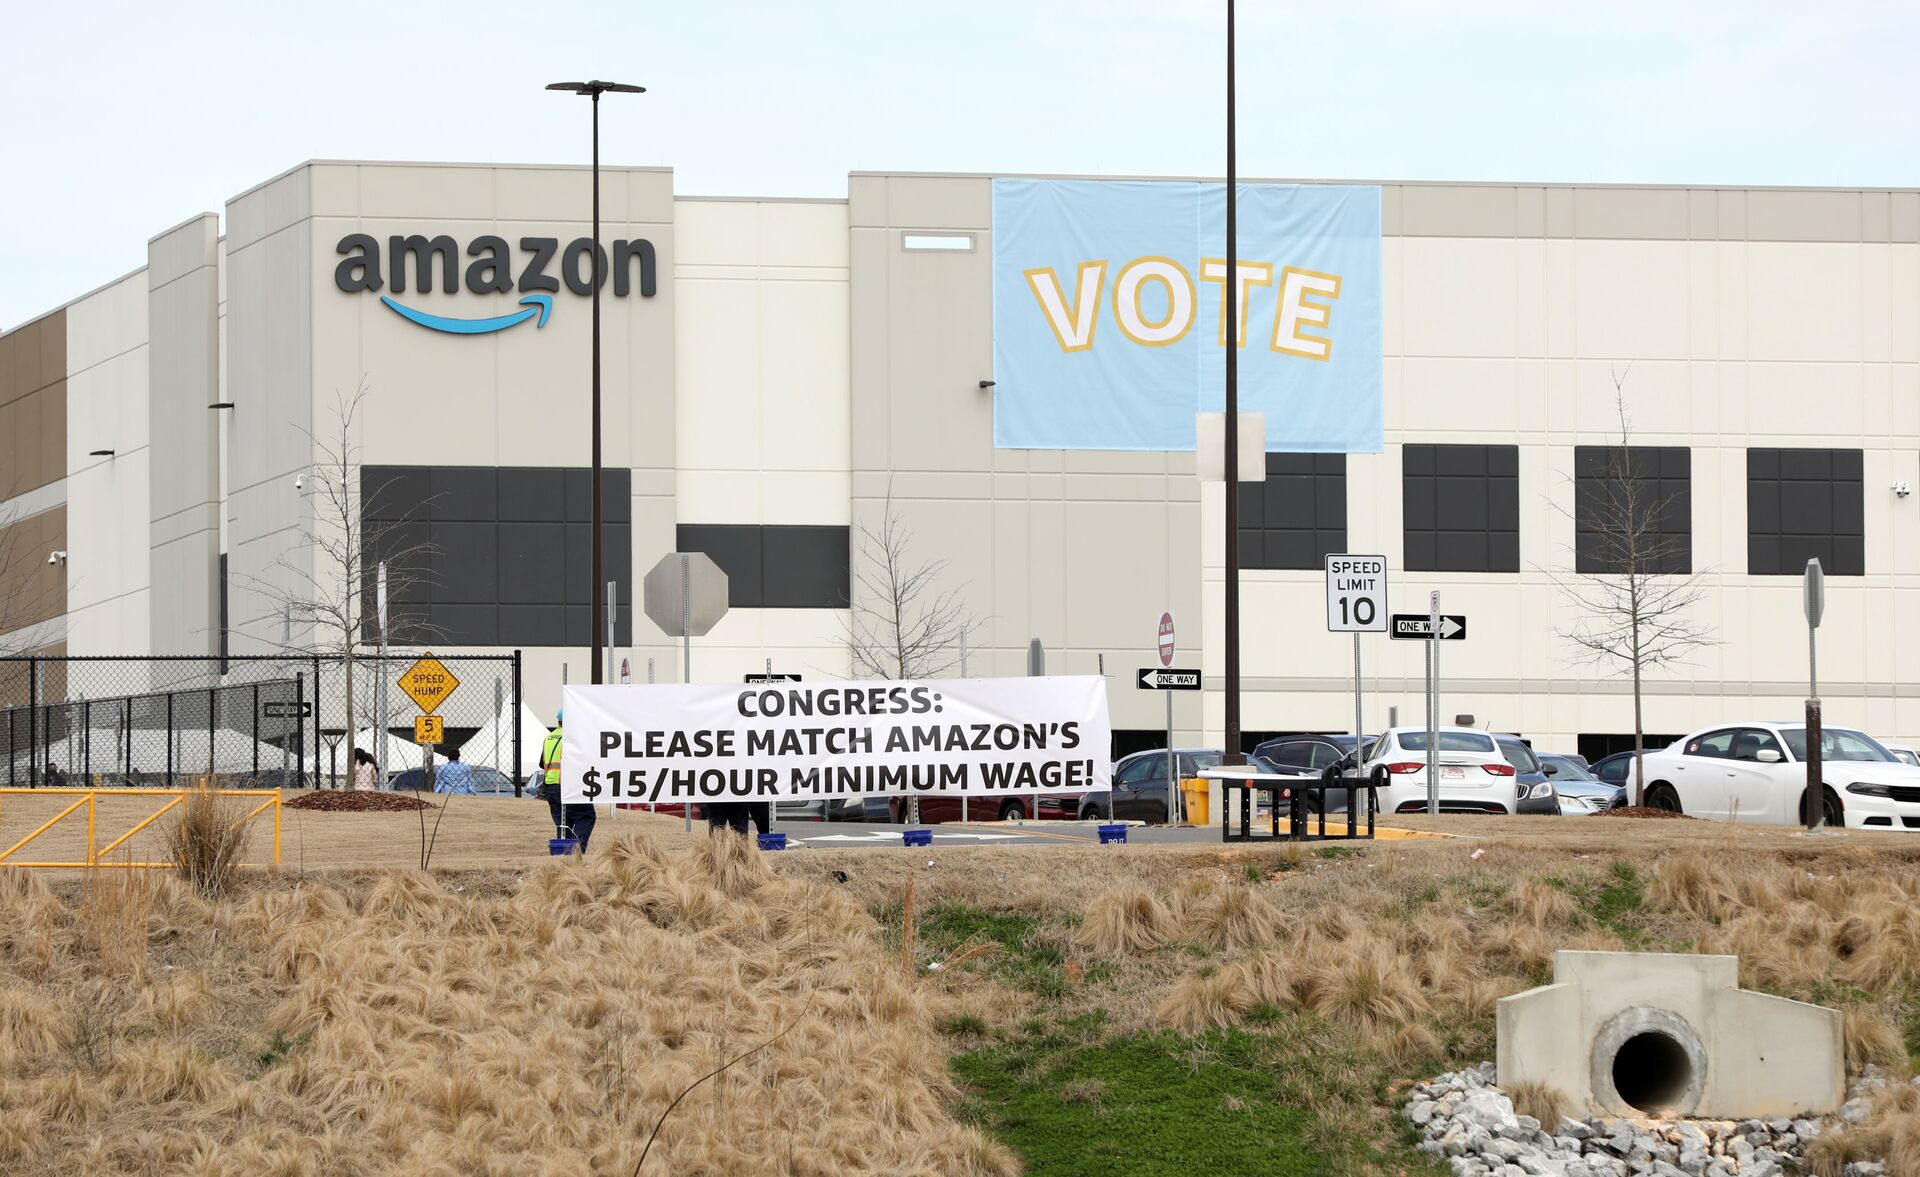 Exclusive: Amazon Drops All Low-Tier Workers From Company’s Internal Social Network Amid Union Push - Sputnik International, 1920, 23.03.2021